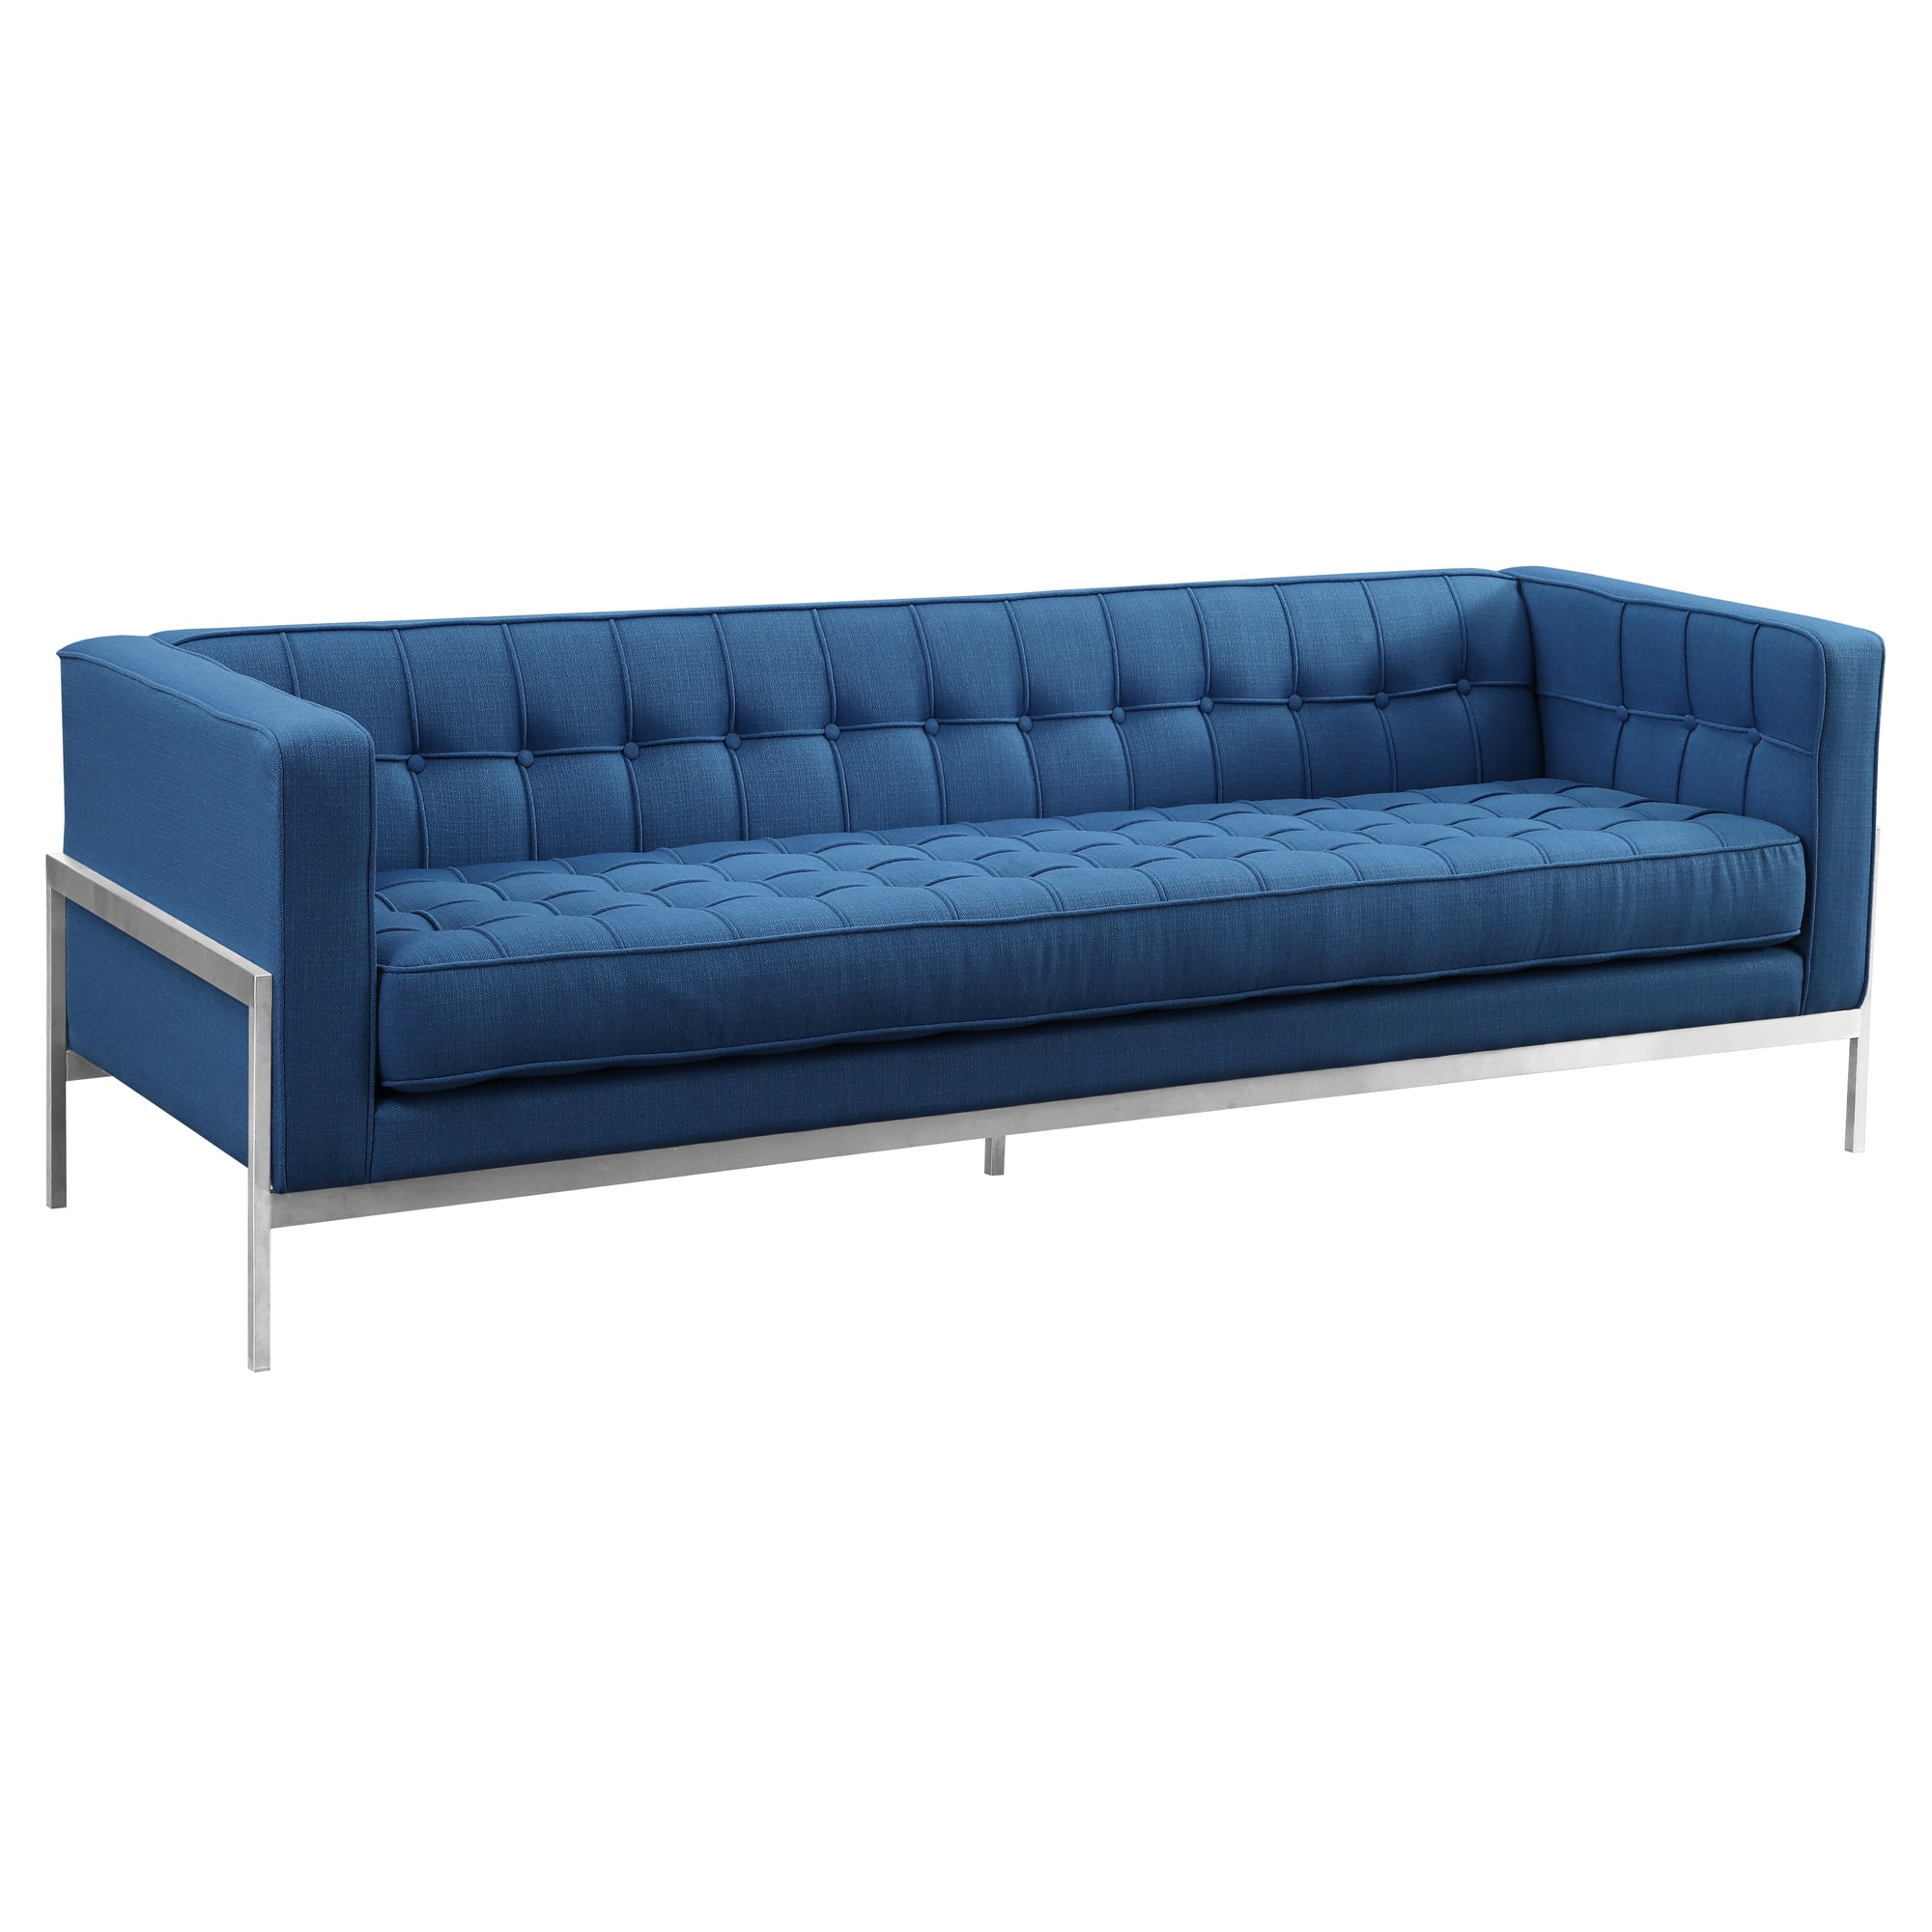 Armen Living Lcan3blue Andre Contemporary Sofa In Brushed Stainless Steel And Blue Fabric